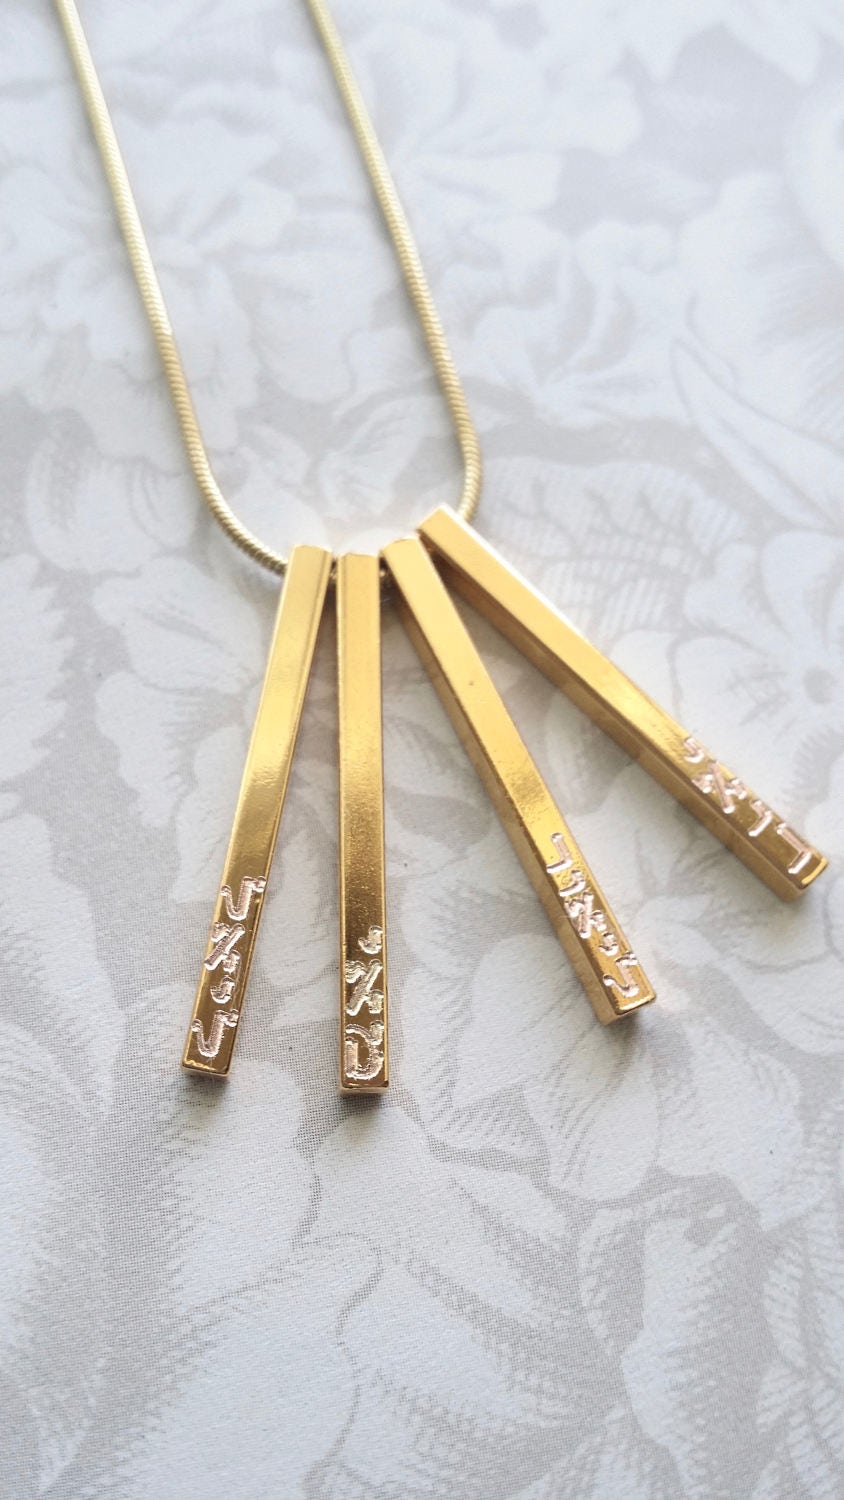 Family necklace, vertical bars engraved with kids names